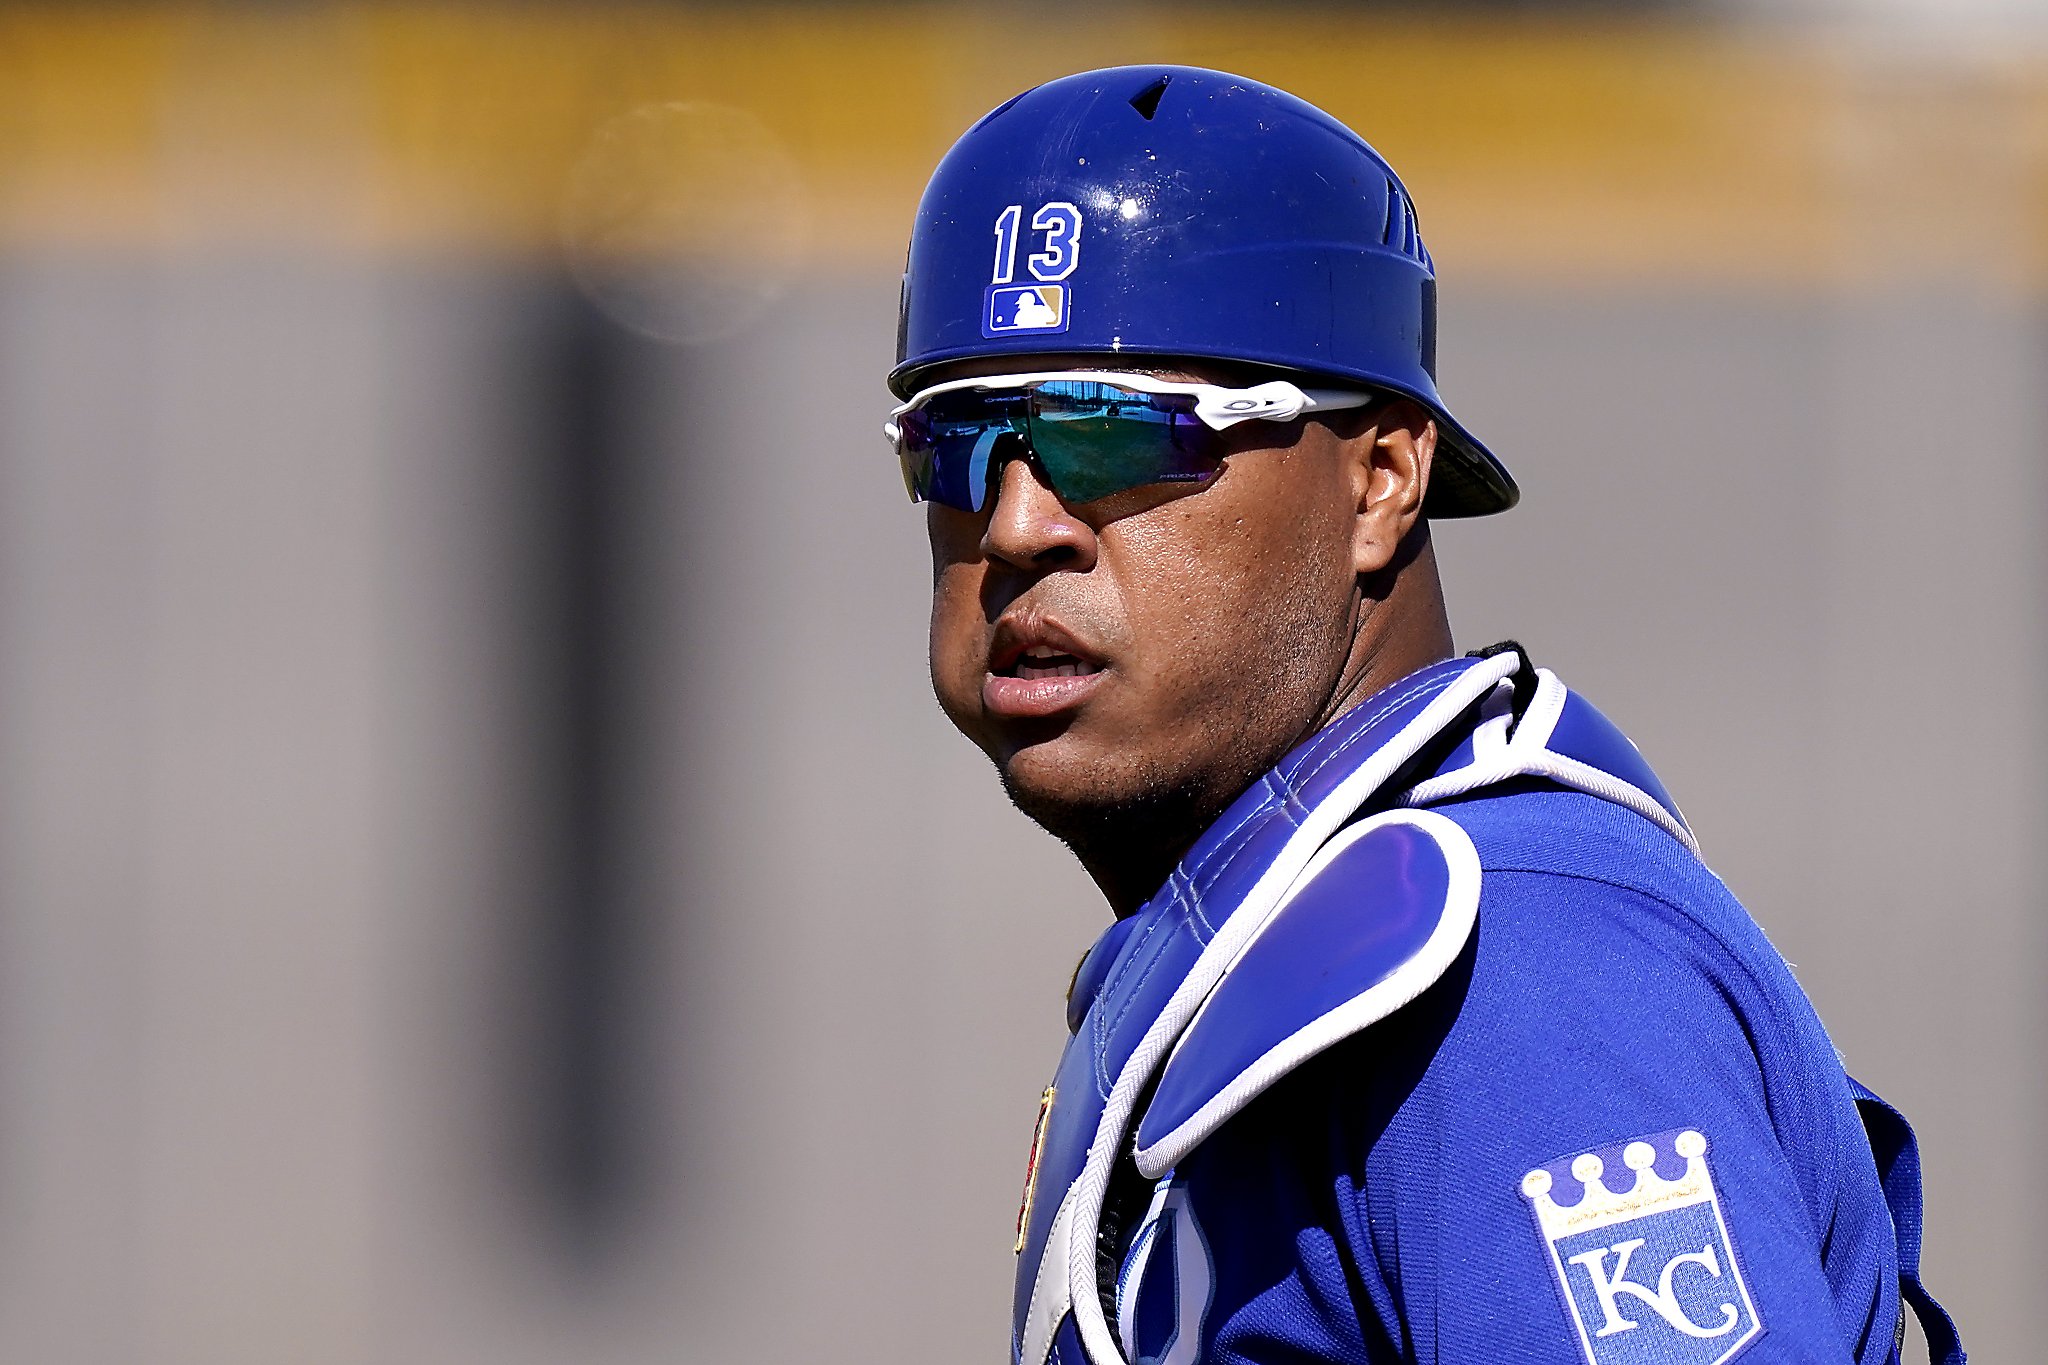 Royals extend Salvador Perez with largest contract in franchise history 